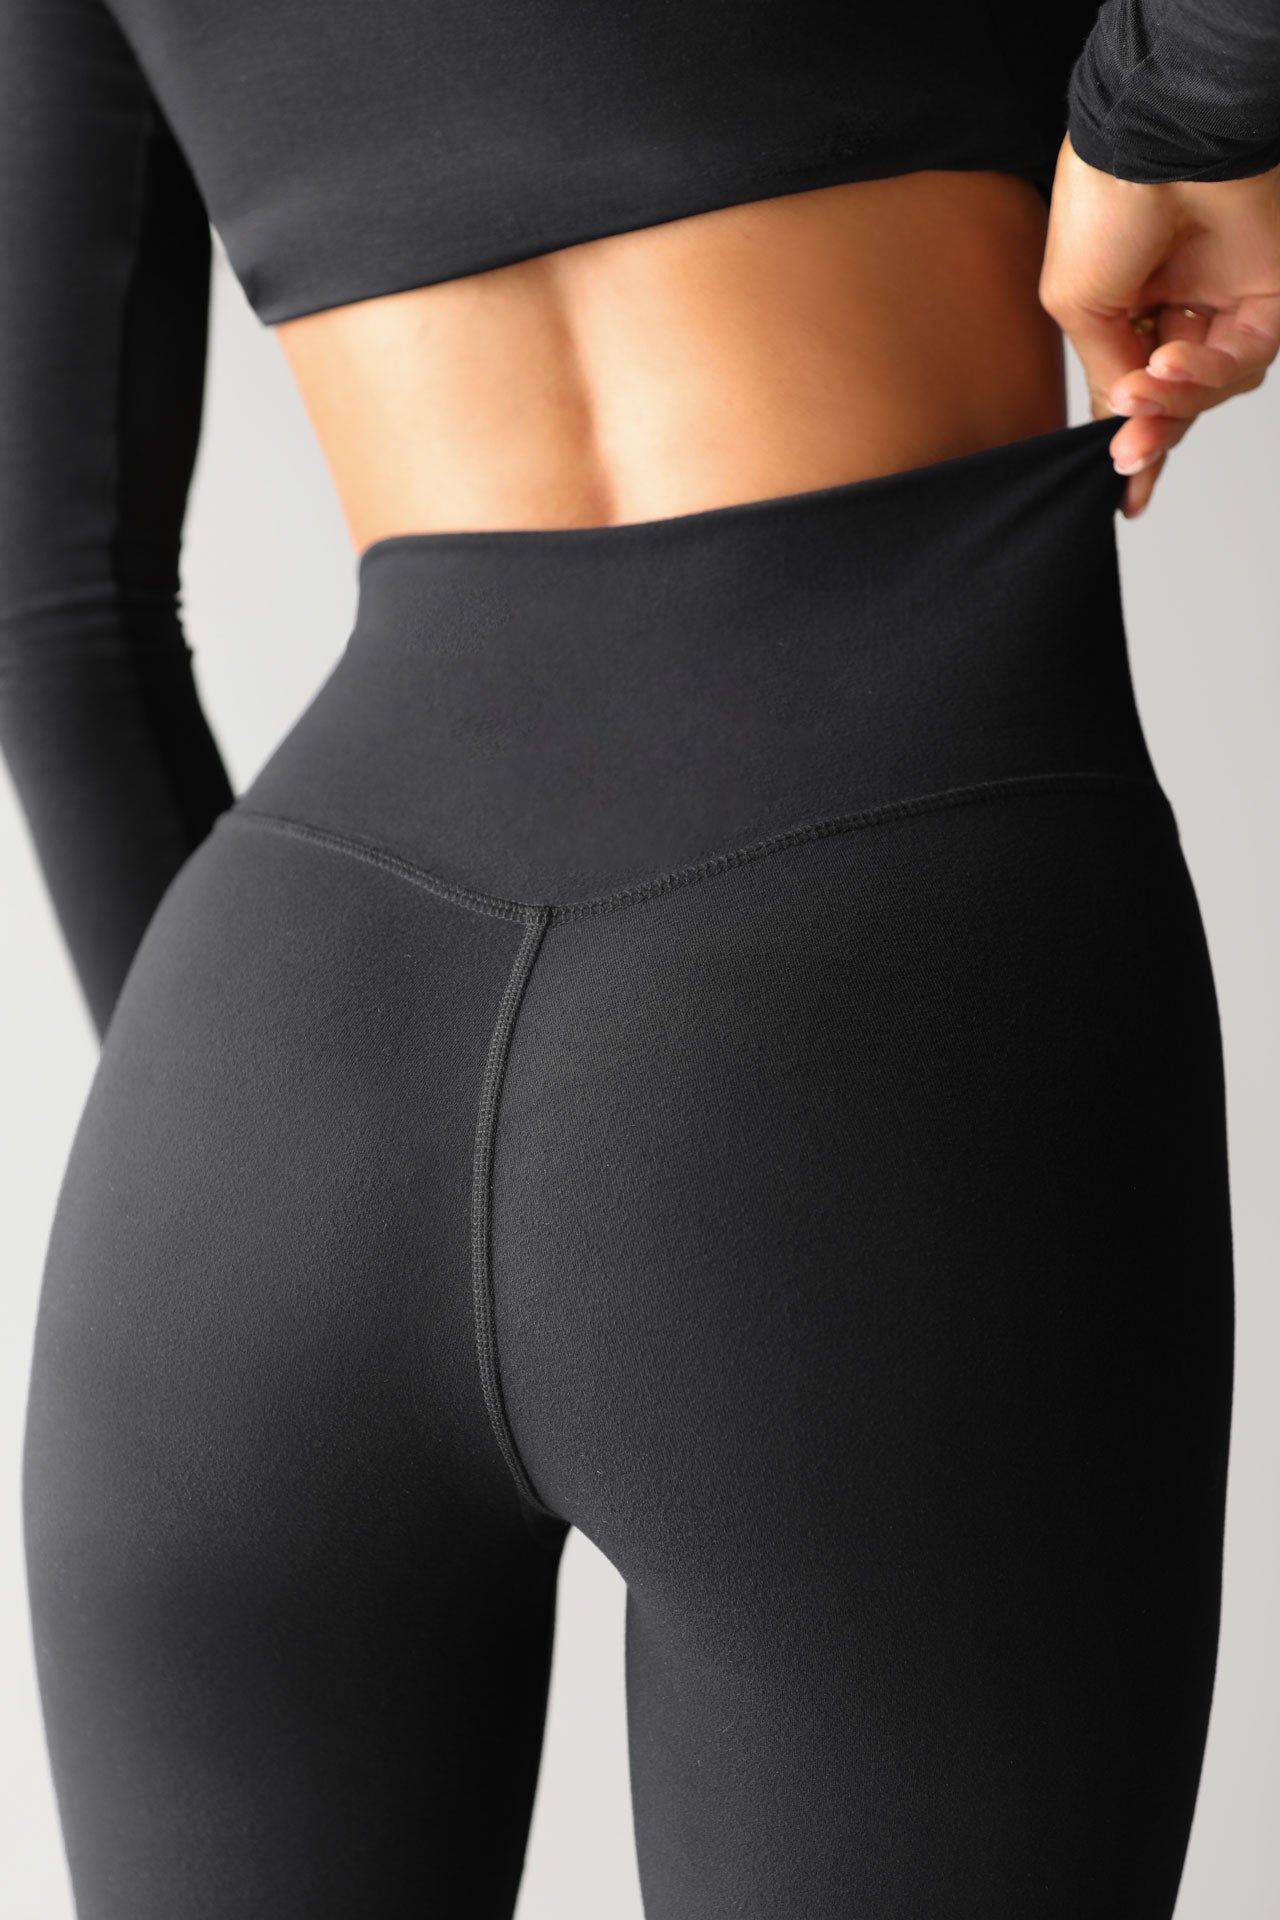 Close up detail back view of model from the waist down posing the full length and high-waisted sueded onyx Second Skin Legging with a wide, v-shaped waistband